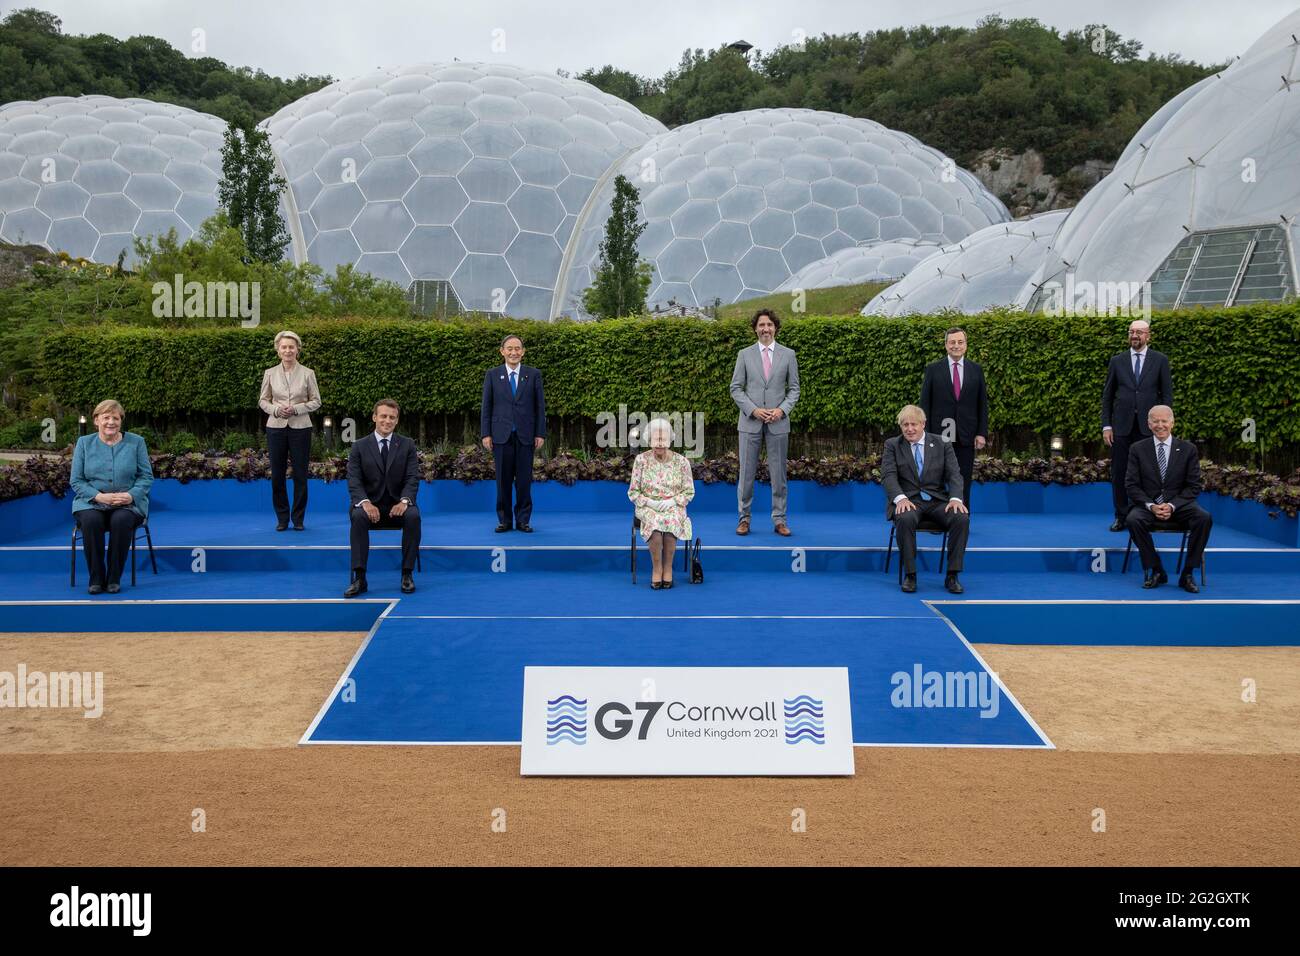 Queen Elizabeth II poses with G7 leaders (left to right back row President of the European Commission Ursula von der Leyen, Japanese Prime Minister Yoshihide Suga, Canadian Prime Minister Justin Trudeau, Italian Prime Minister Mario Draghi, President of the European Council Charles Michel, (front row left to right) German Chancellor Angela Merkel, French President Emmanuel Macron, British Prime Minister Boris Johnson and US President Joe Biden, before a reception at the Eden Project during the G7 summit in Cornwall. Picture date: Friday June 11, 2021. Stock Photo